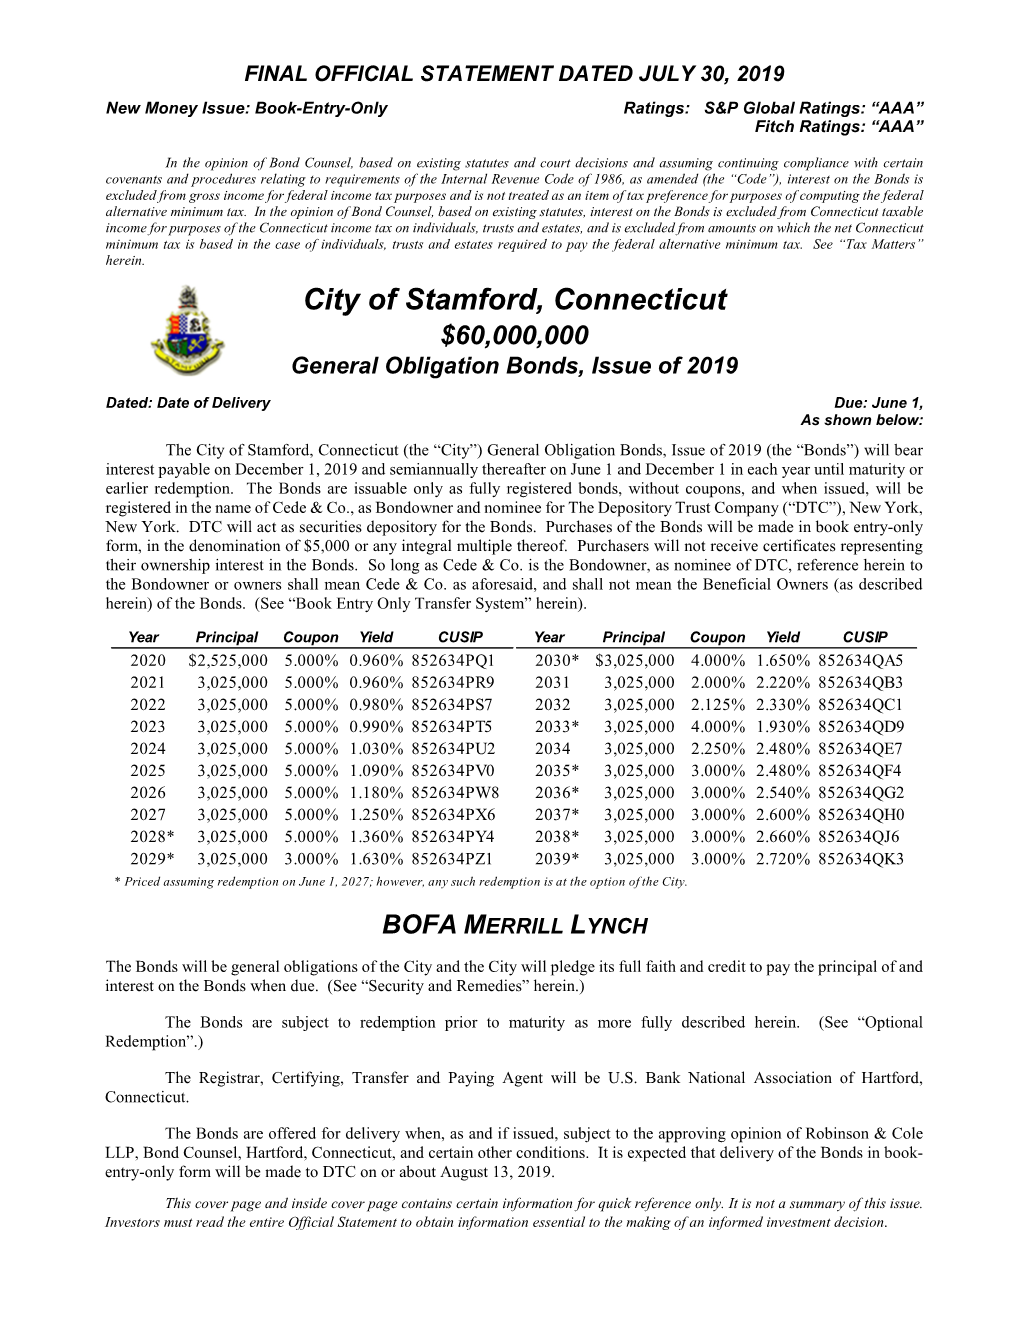 City of Stamford, Connecticut $60,000,000 General Obligation Bonds, Issue of 2019